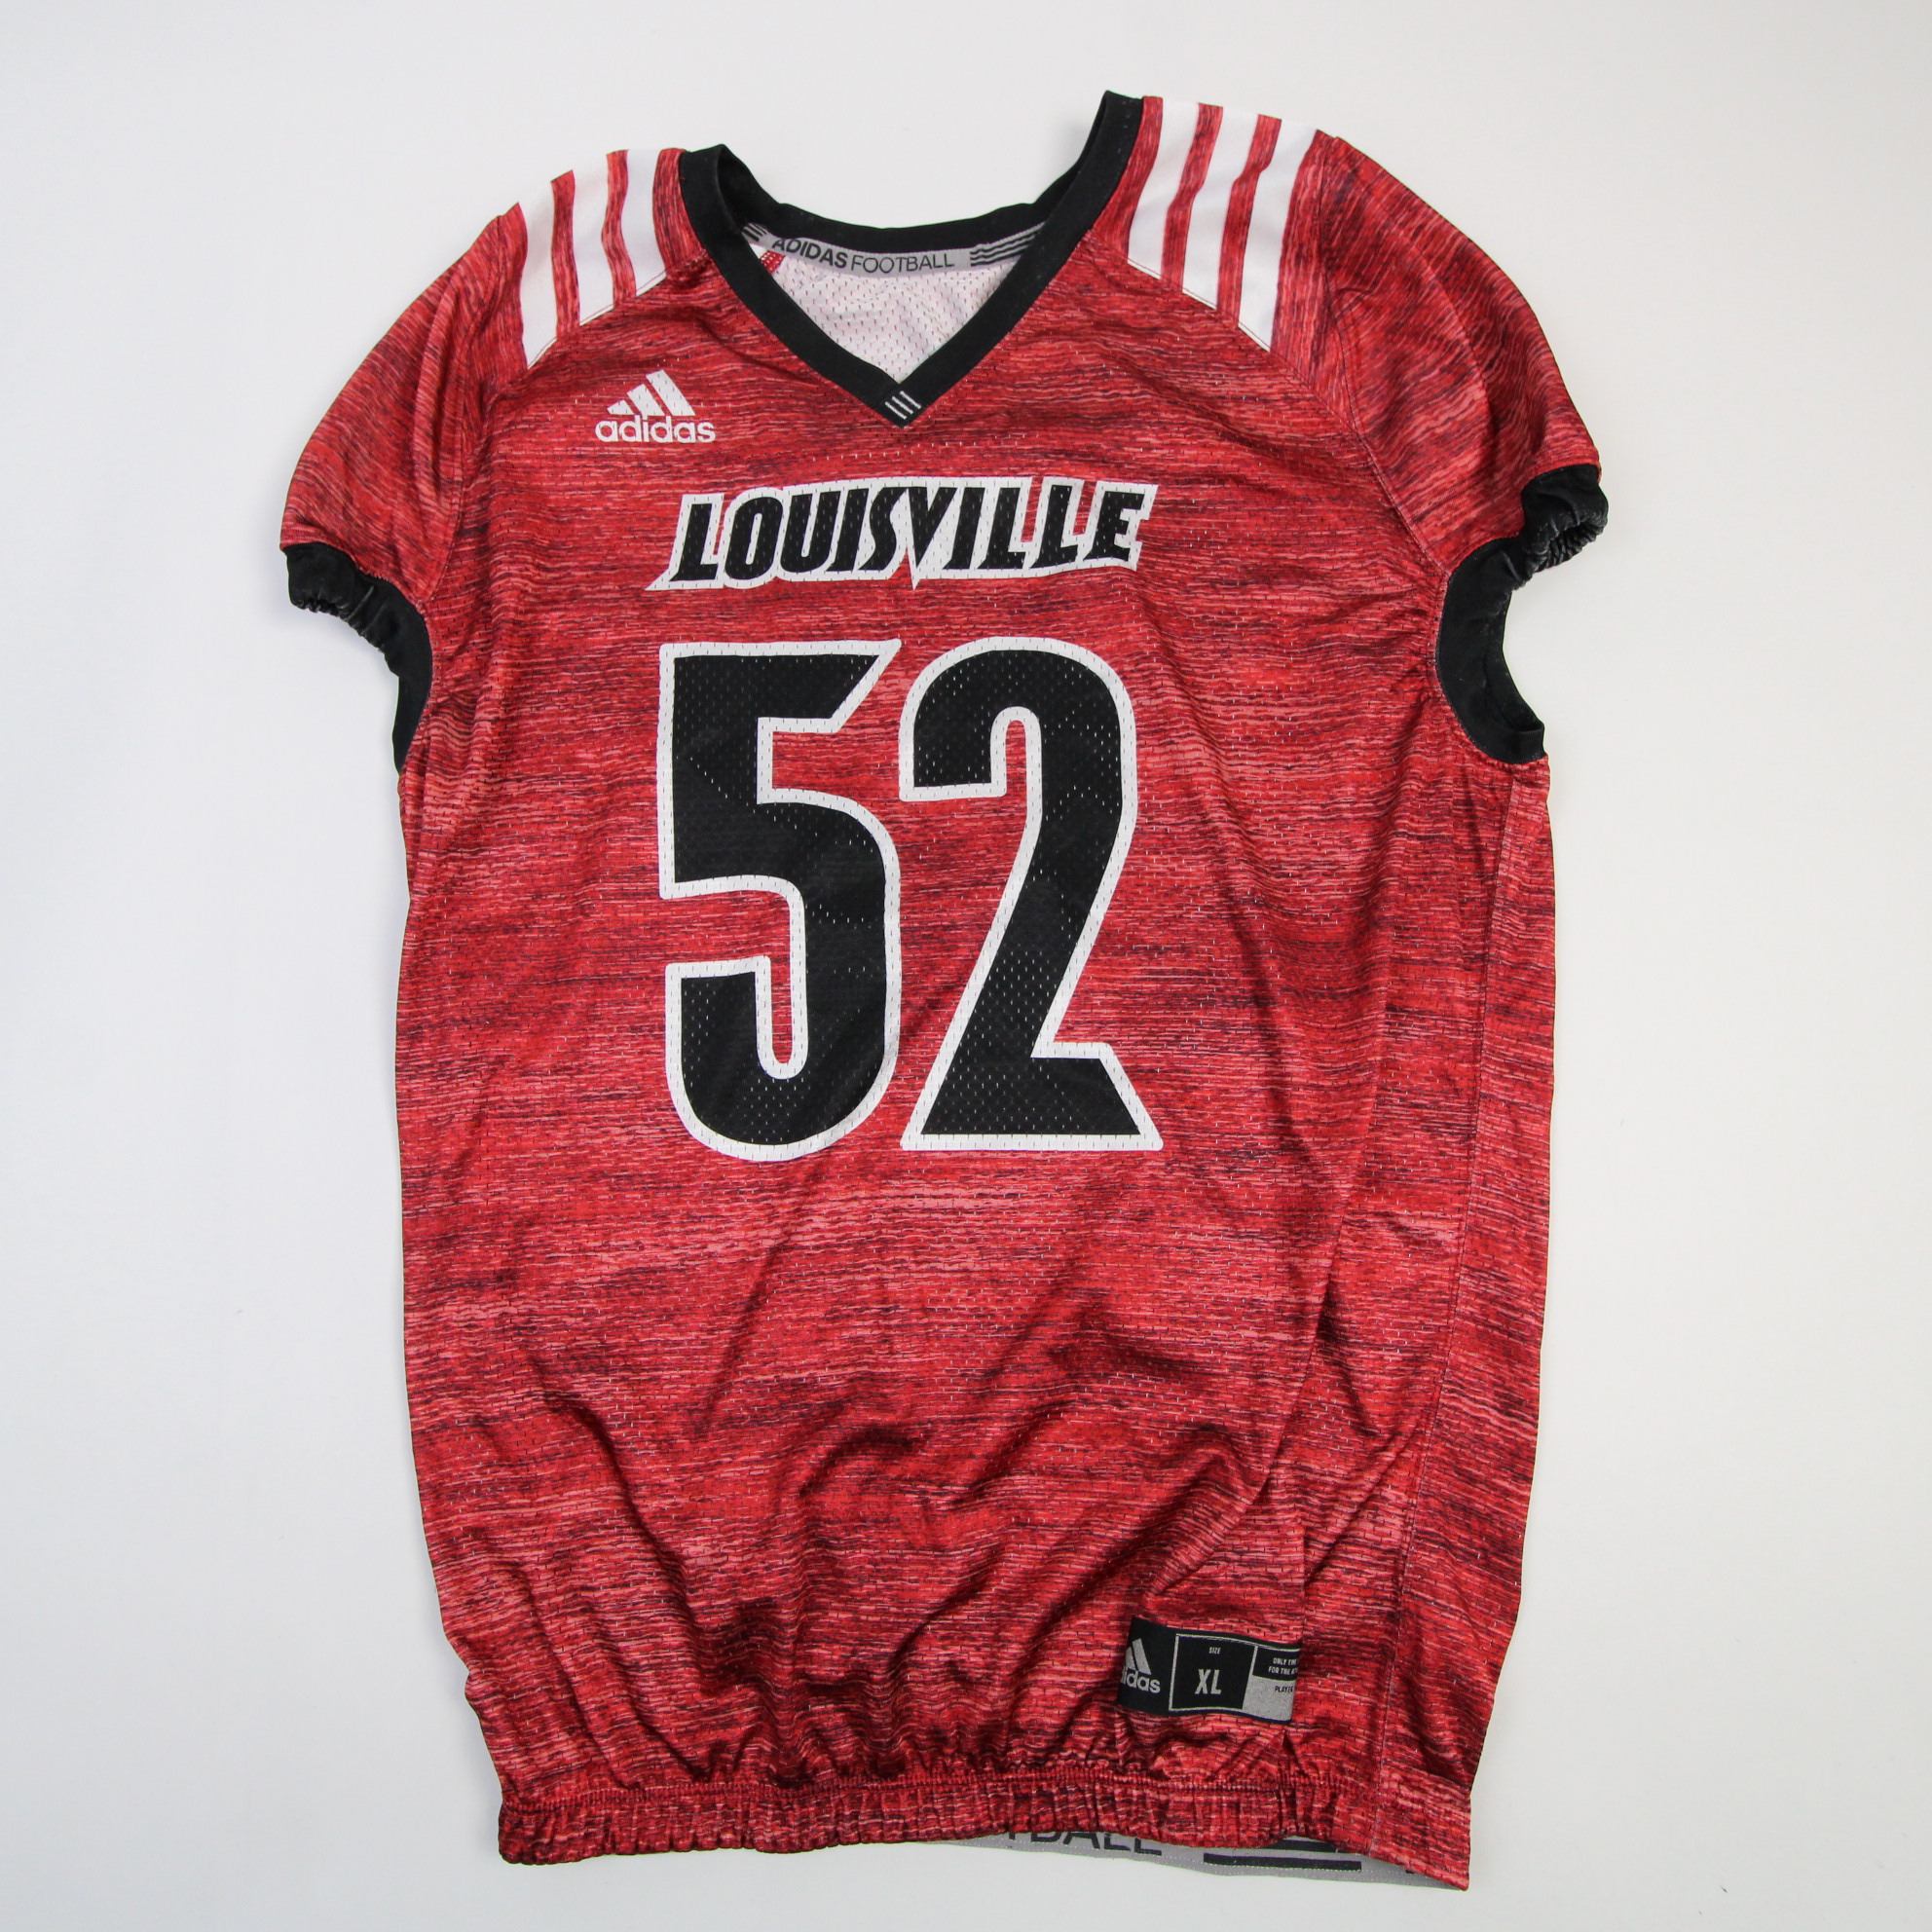 Louisville Cardinals adidas Practice Jersey - Football Men's Red Used